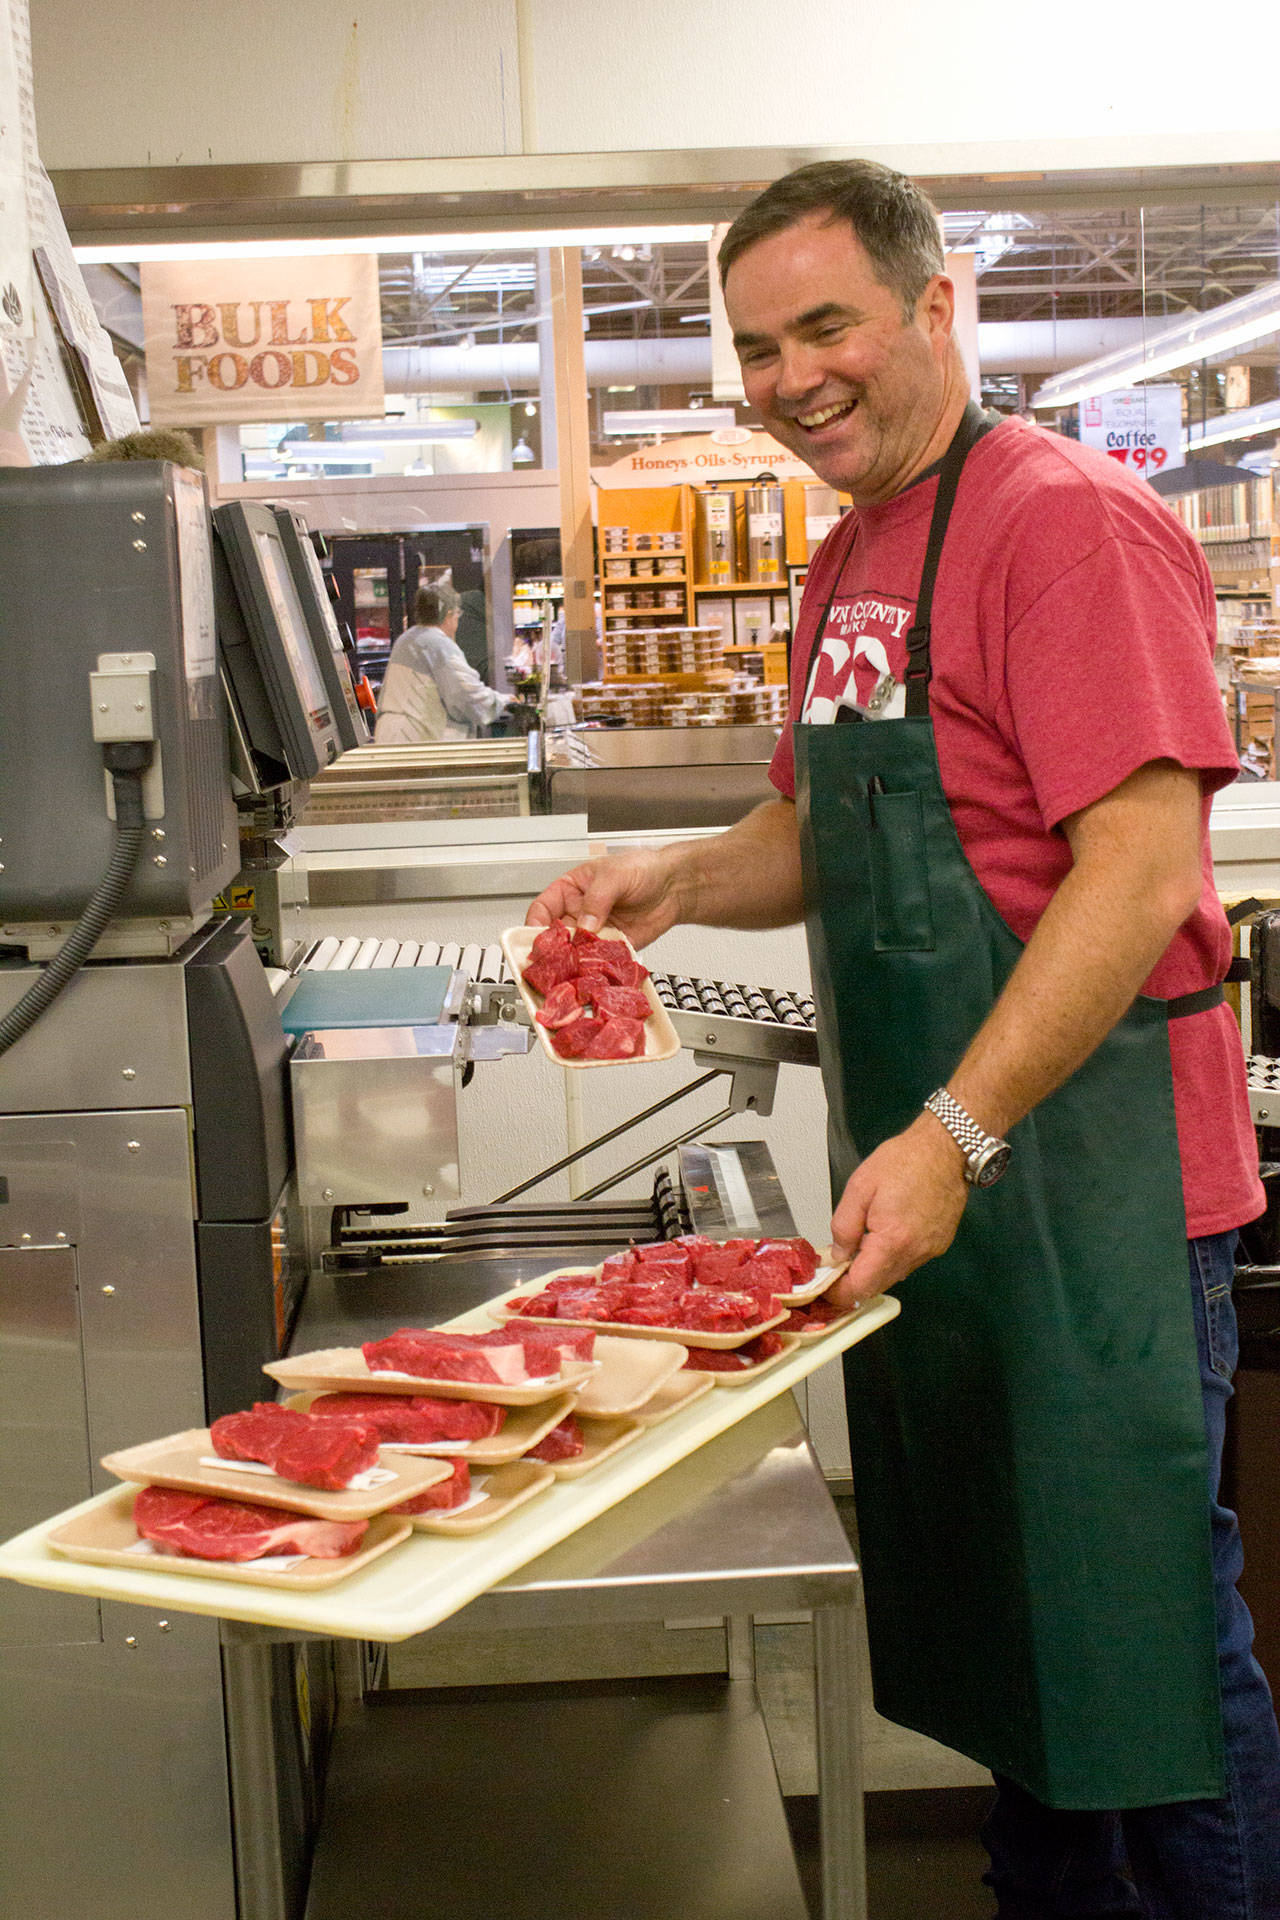 Central Market meat manager Jeremy Geiger: “There’s a sense of family and togetherness you find here that’s kept me here so long. There will always be a place for a store like this, a place in the community, gathering spot for people to come and shop, talk and connect.” (Sophie Bonomi / Kitsap News Group)